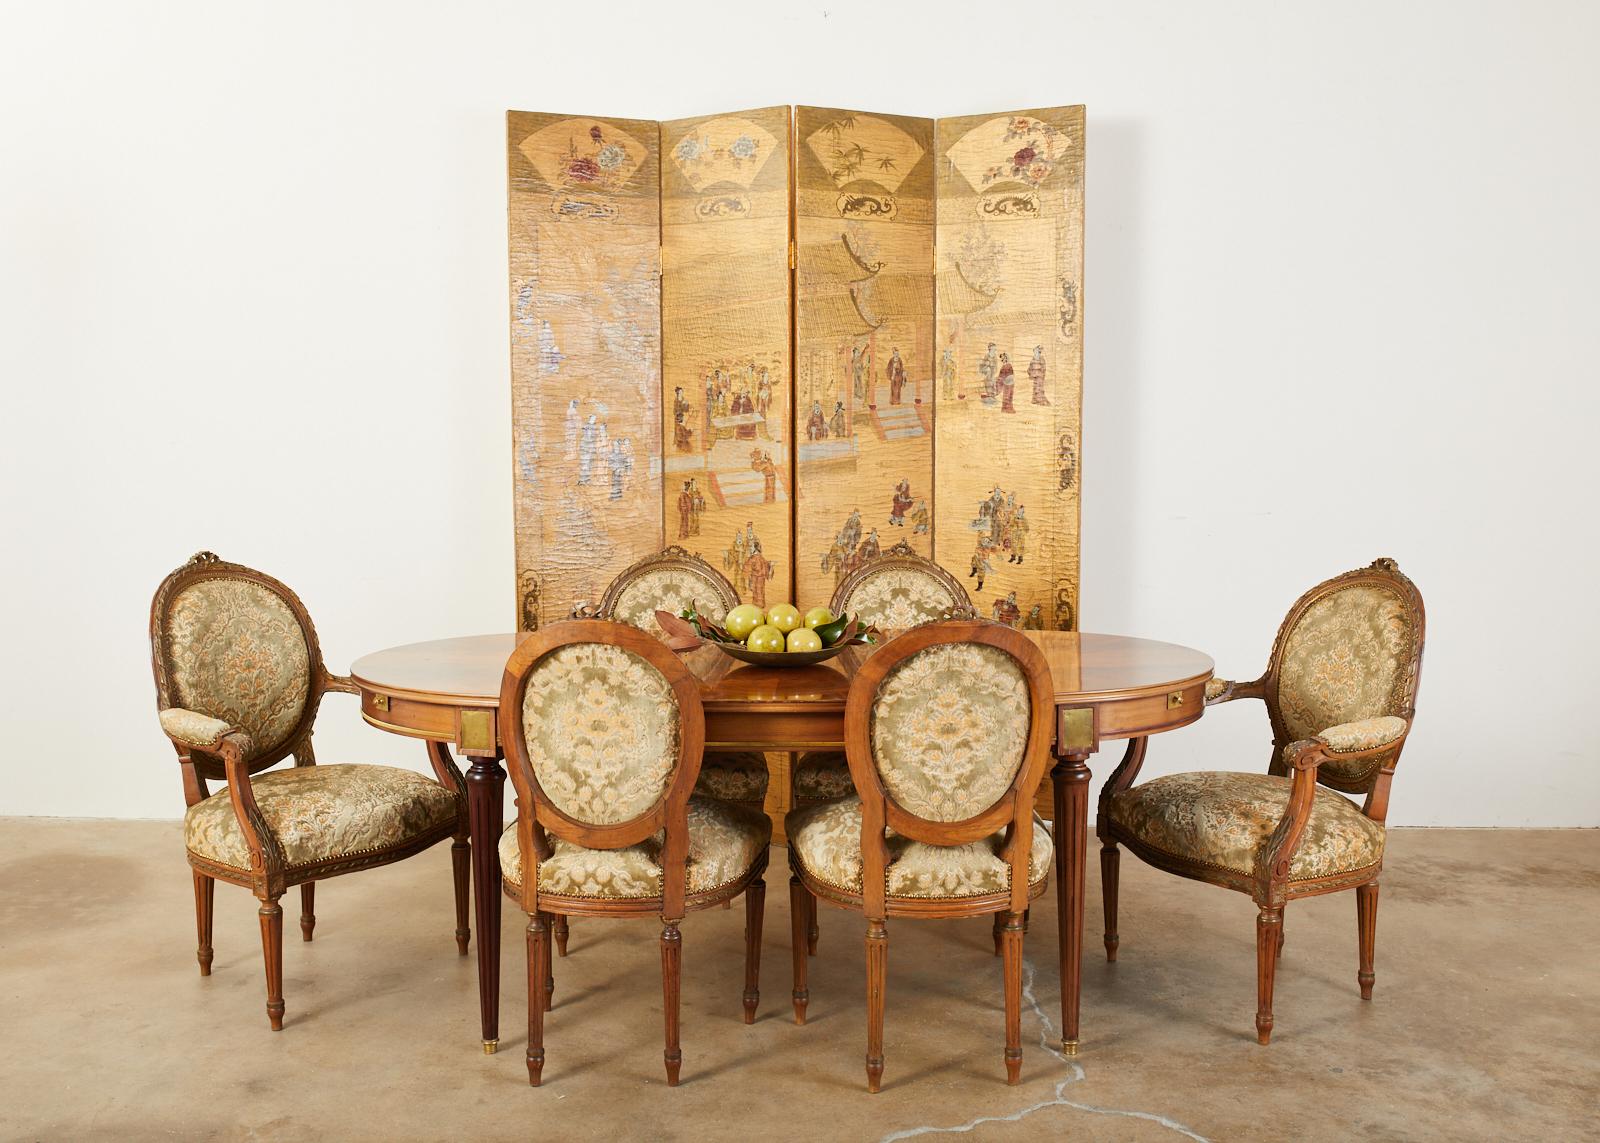 Qing style Chinese export four panel lacquered folding coromandel screen featuring a dramatic gilt background. The front of the screen is decorated with a pagoda court scene with figures engaged in leisurely activities. The scene is bordered with a